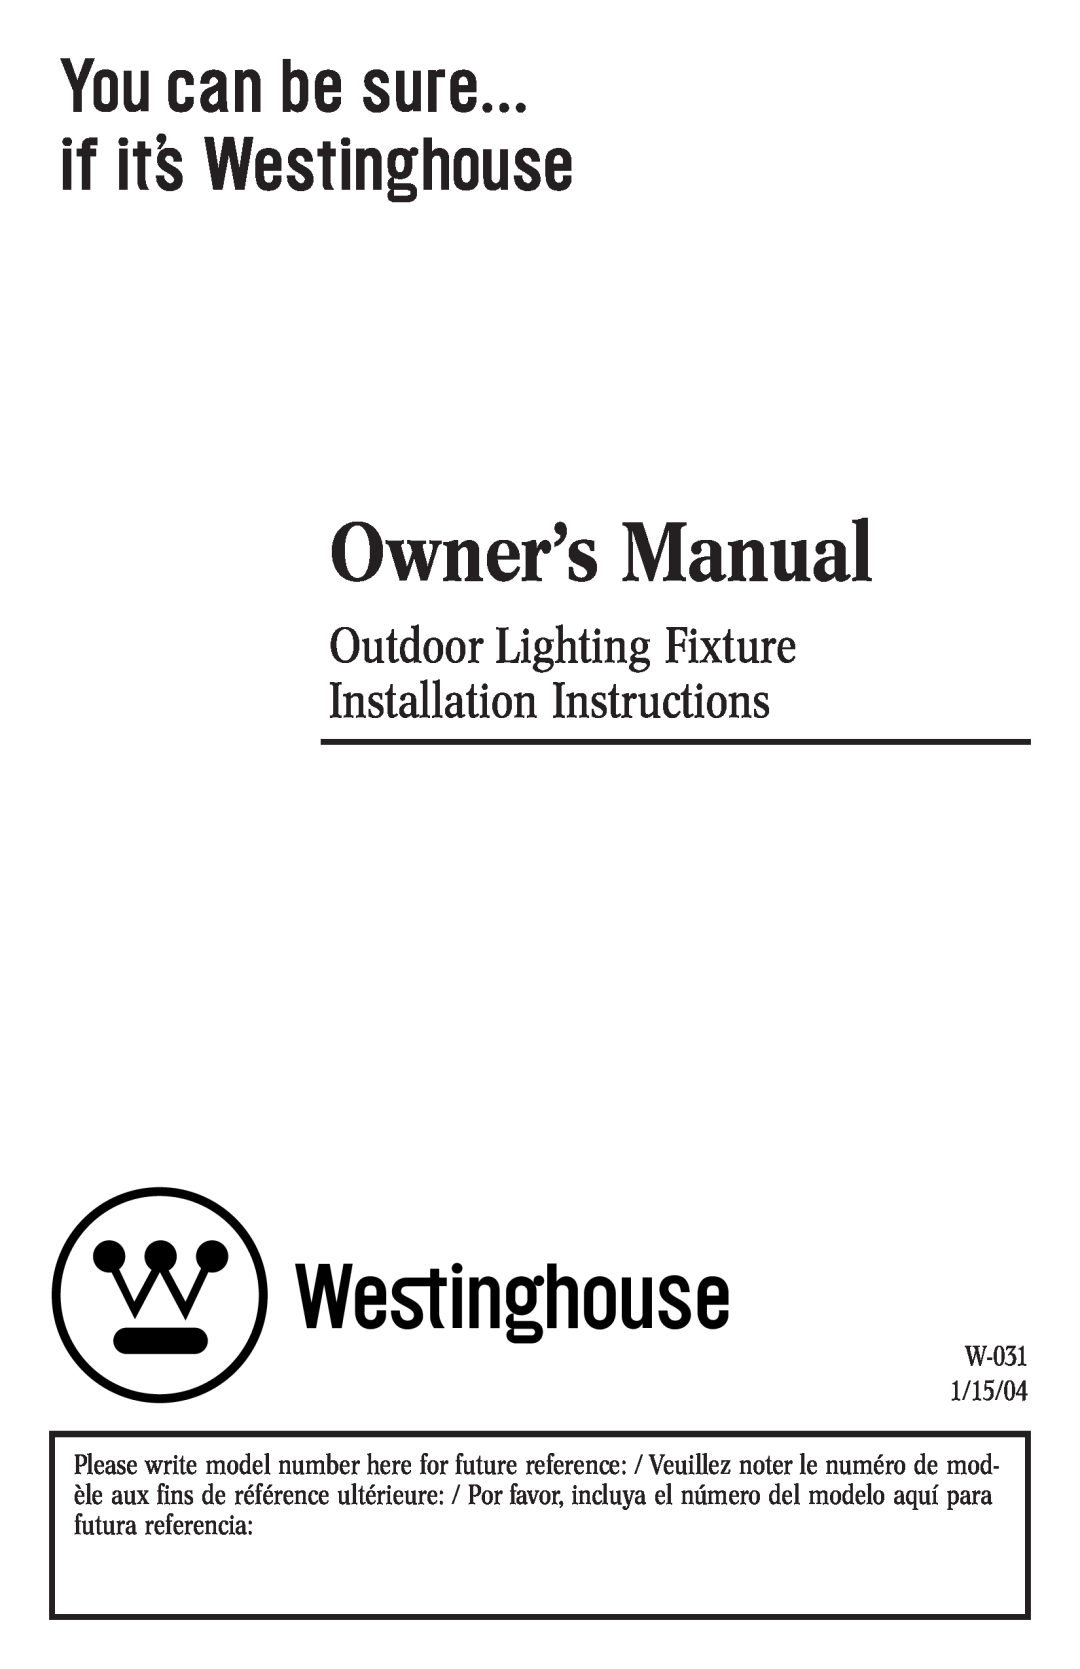 Westinghouse W-031 1/15/04 owner manual Outdoor Lighting Fixture Installation Instructions 